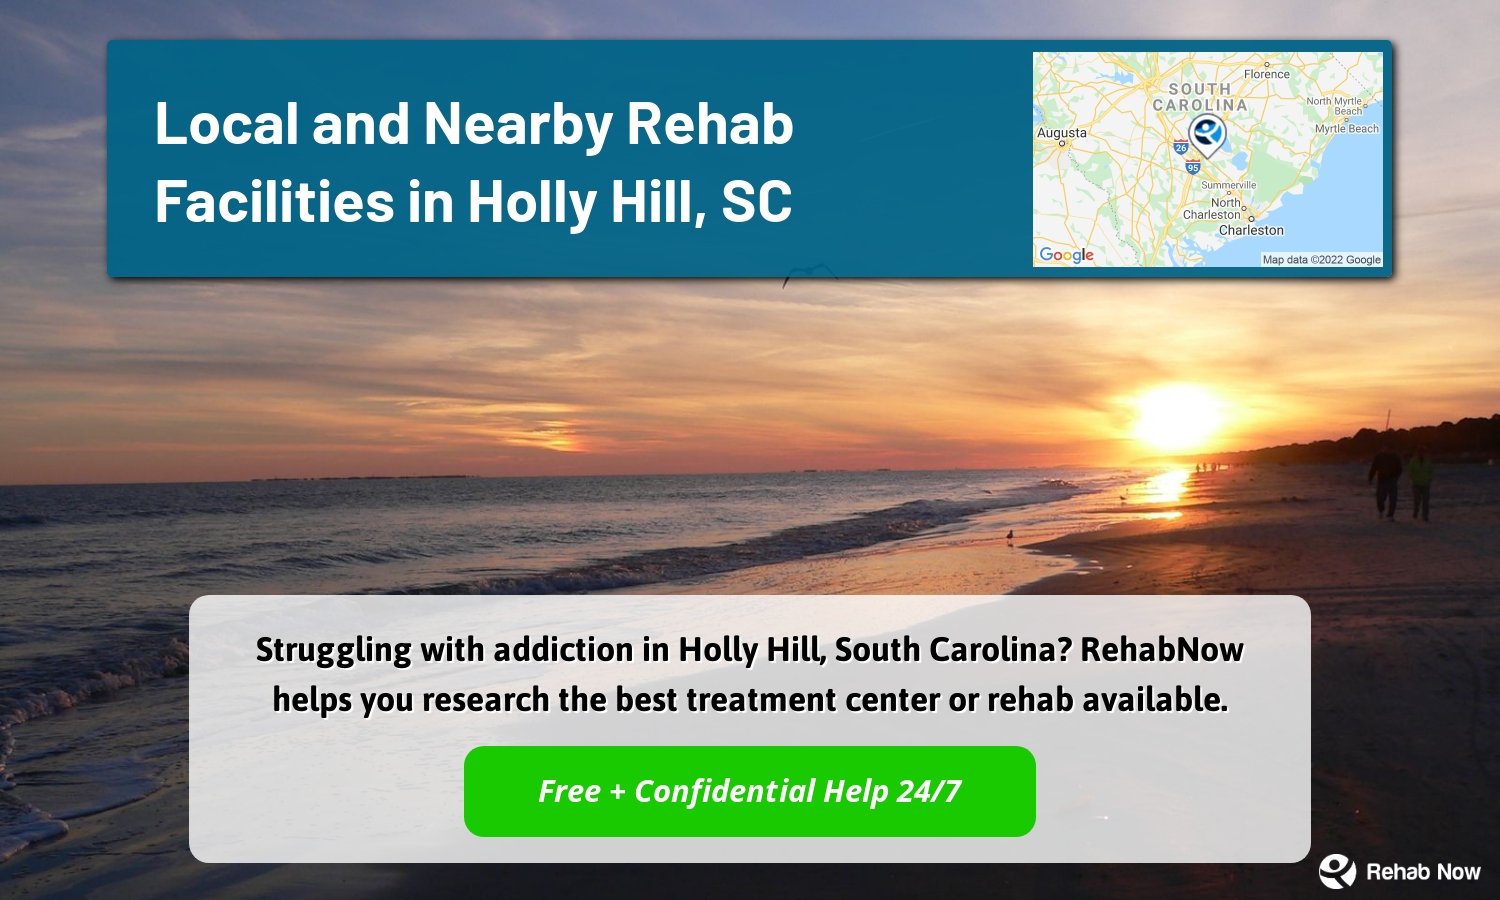 Struggling with addiction in Holly Hill, South Carolina? RehabNow helps you research the best treatment center or rehab available.